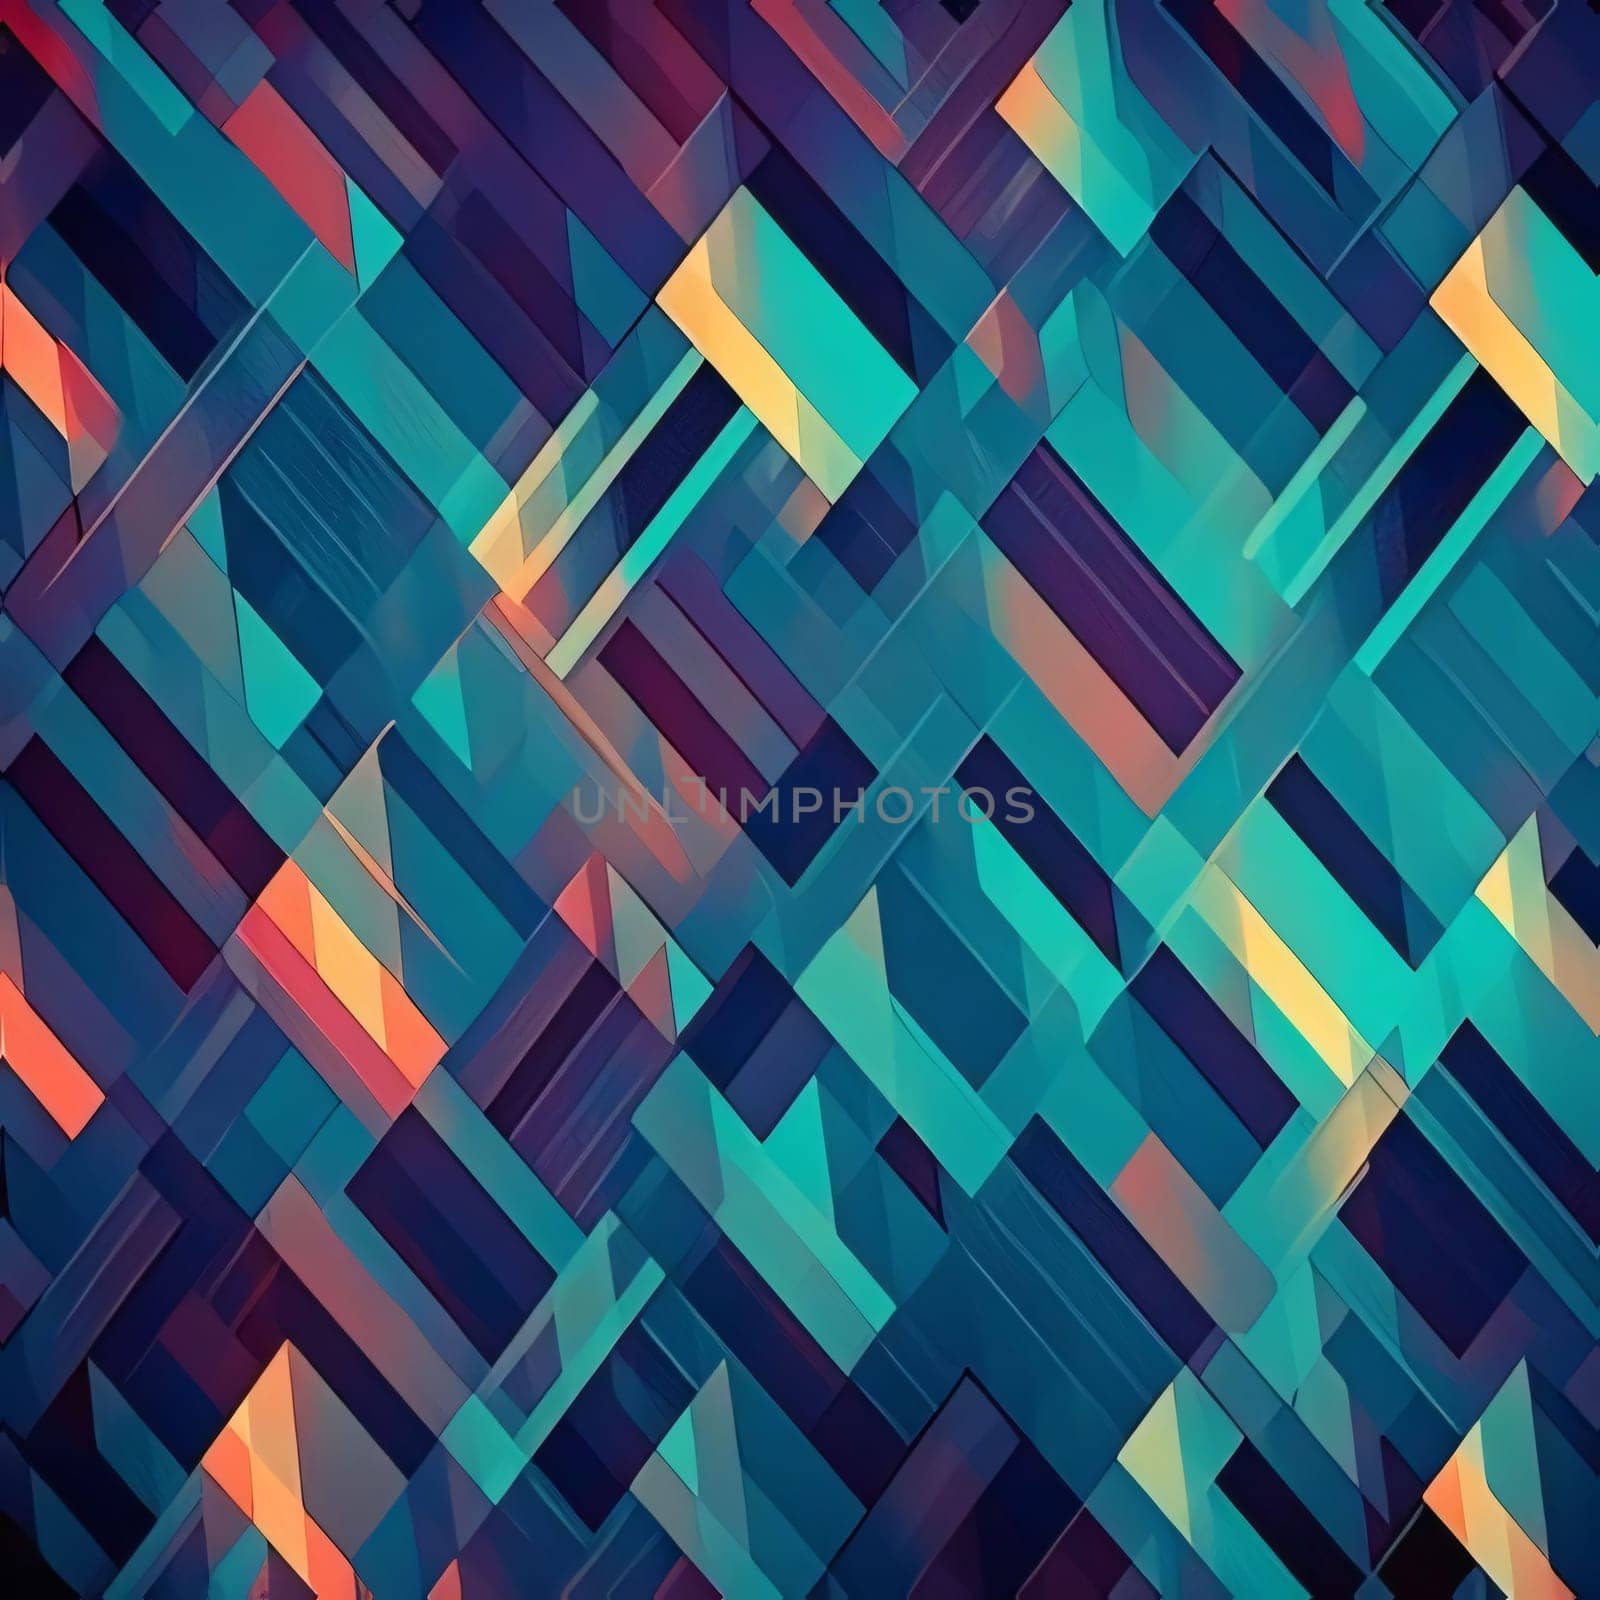 Abstract background design: abstract background with geometric pattern in blue and red colors, vector illustration